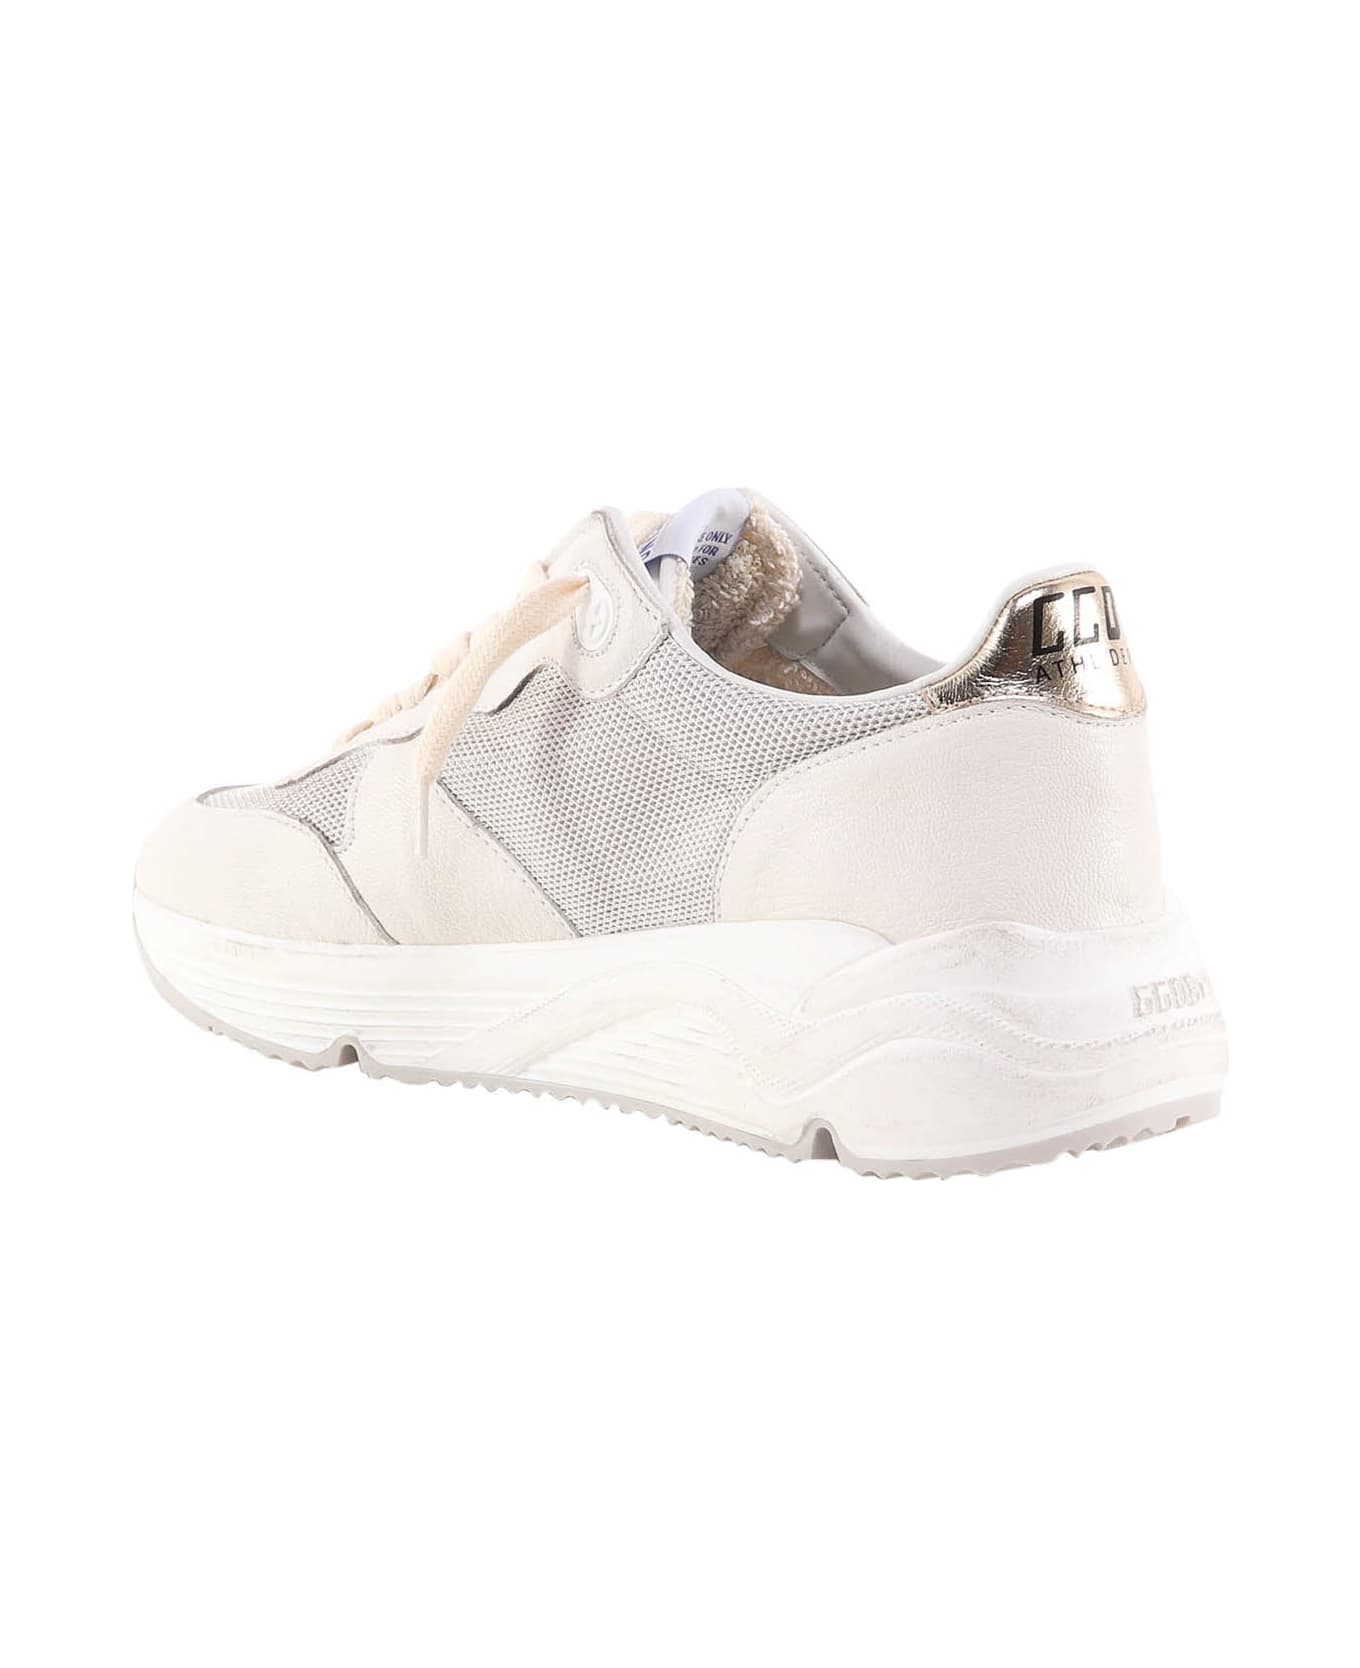 Golden Goose Running Sole Sneakers - Silver/white/platinum